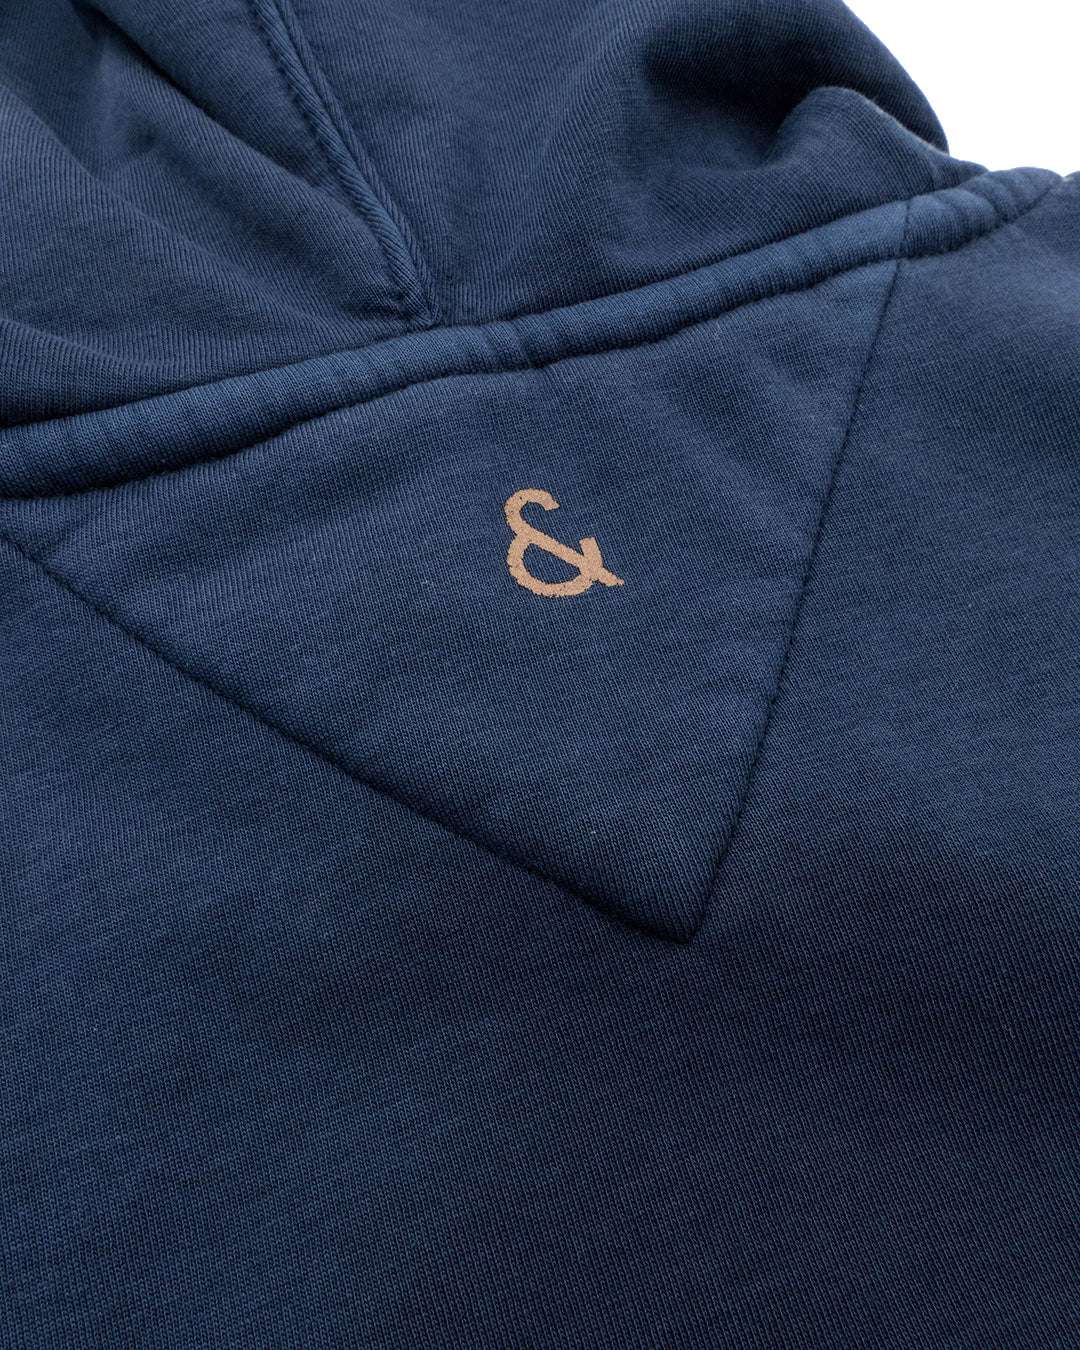 Hoodie-Zip Pigment Dyed in Midnight Sweatjacken Colours and Sons   